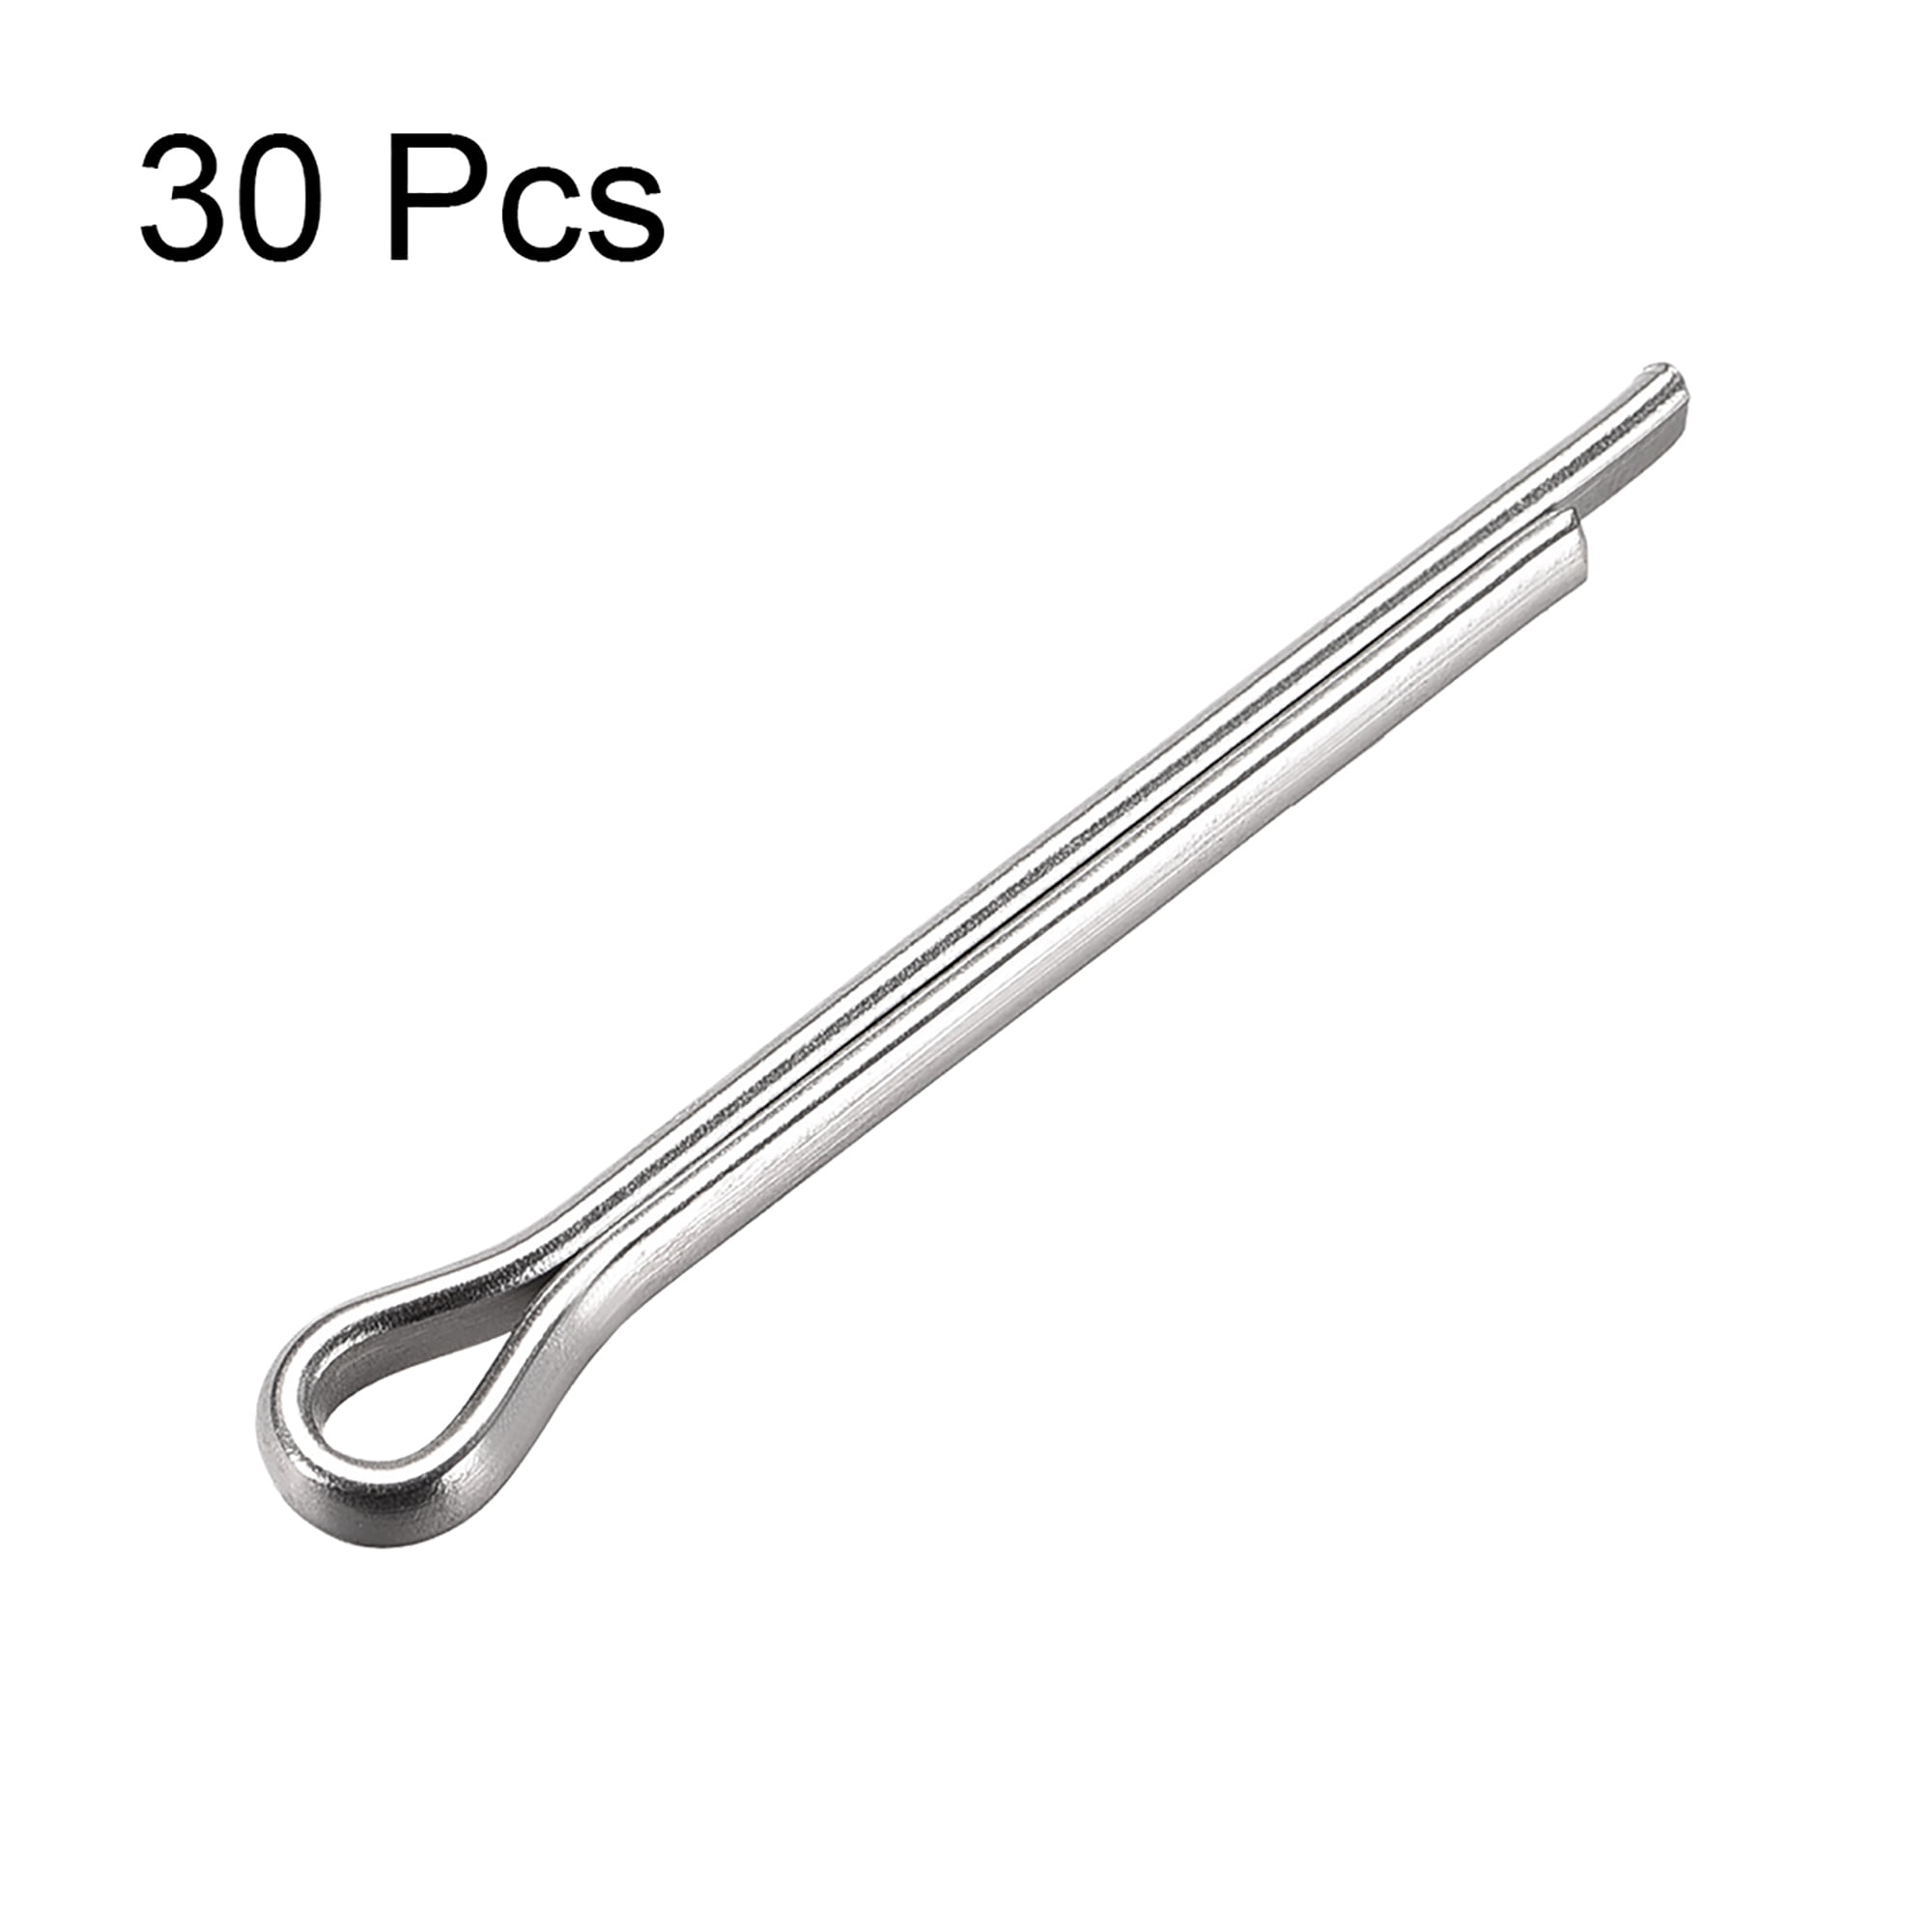 90 mm Stainless Steel Cotter Pin Refills